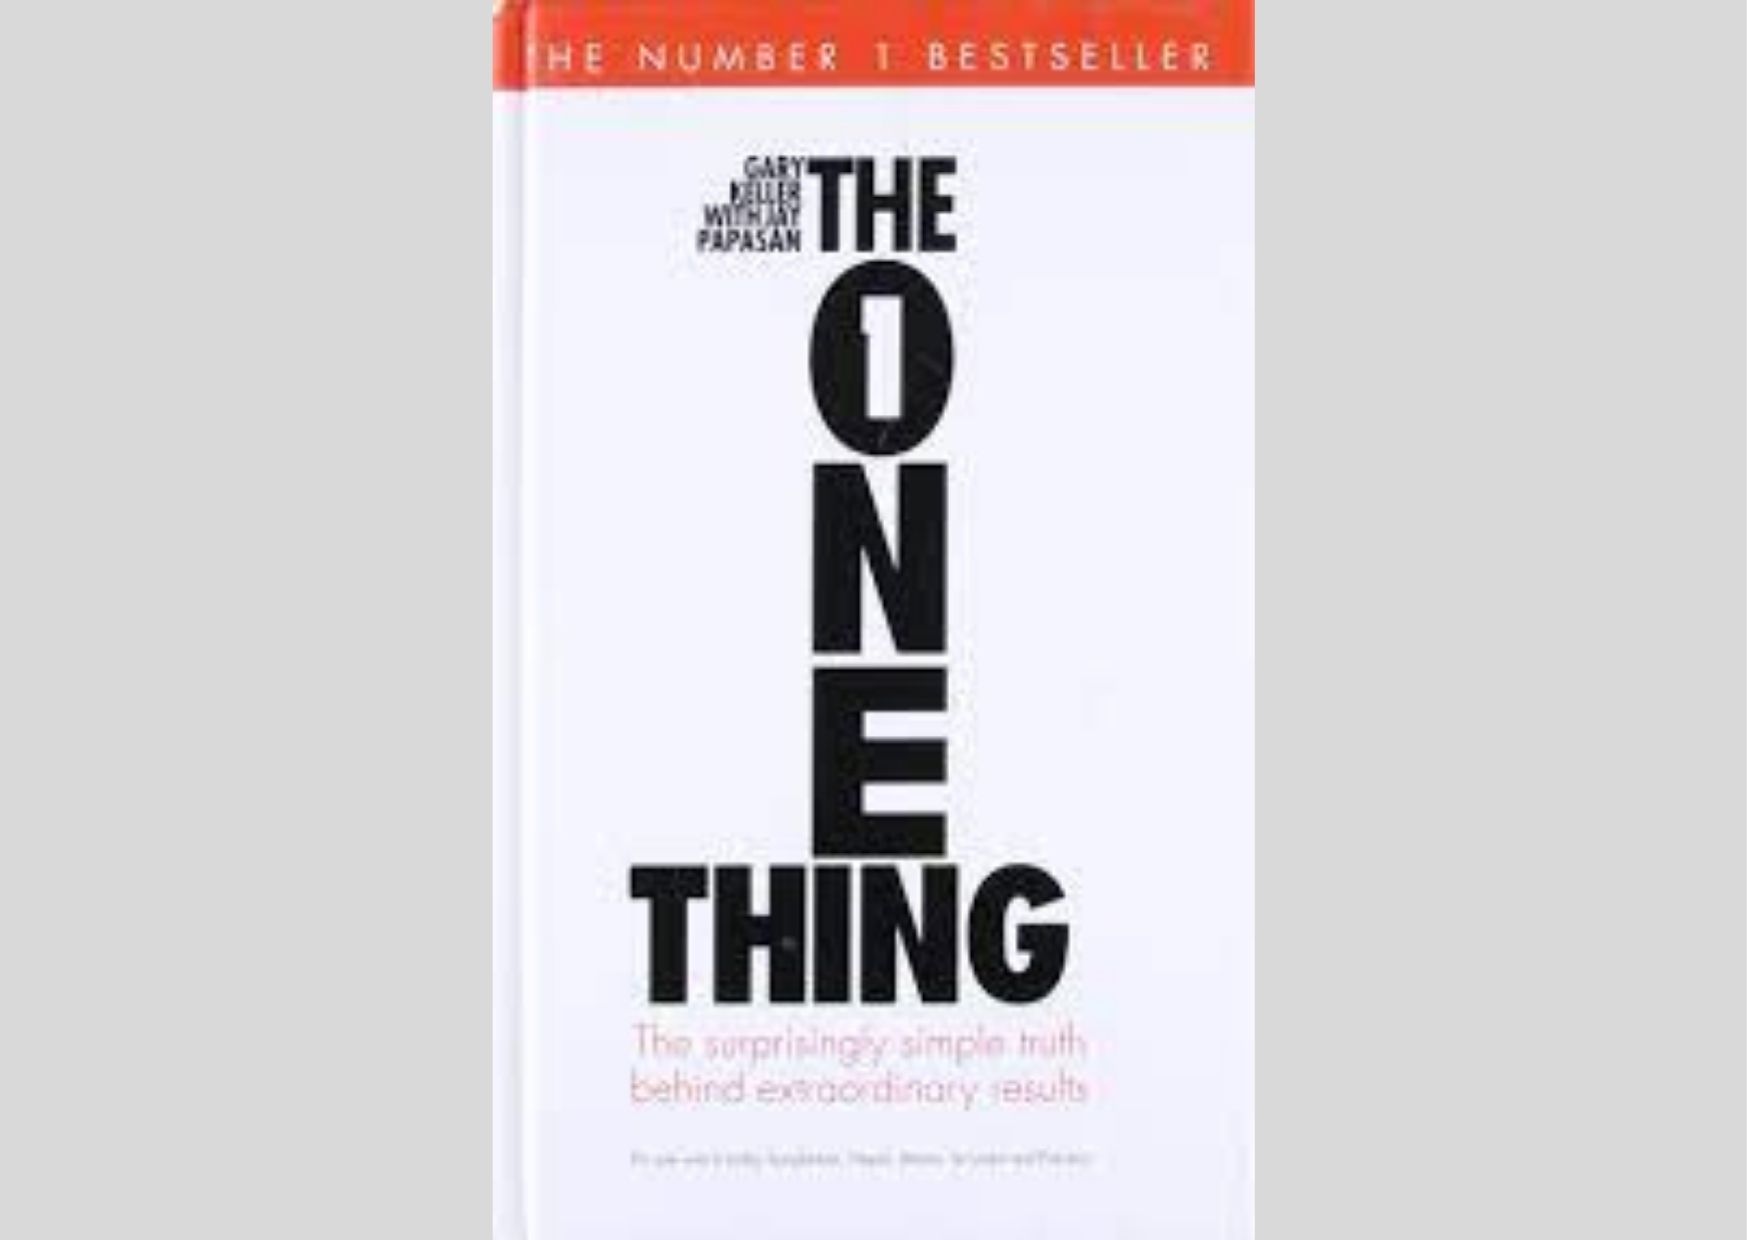 The one thing книга. The one thing Гэри Келлер книга. В фокусе книга Гэри Келлер. Книга в фокусе Гэри Келлер in English. The 1 thing book